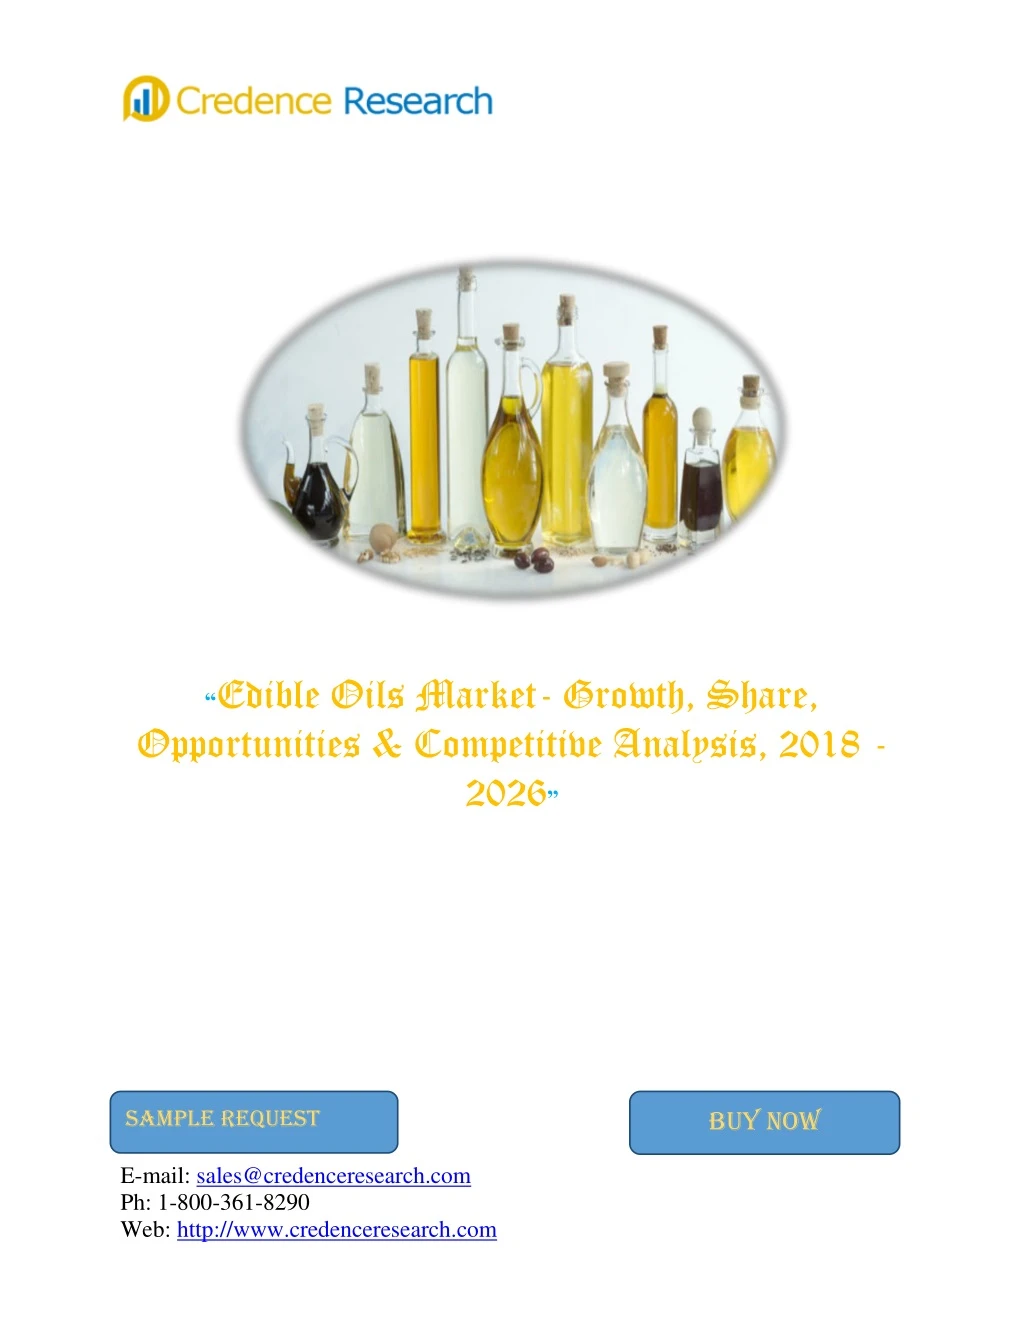 edible oils market growth share opportunities